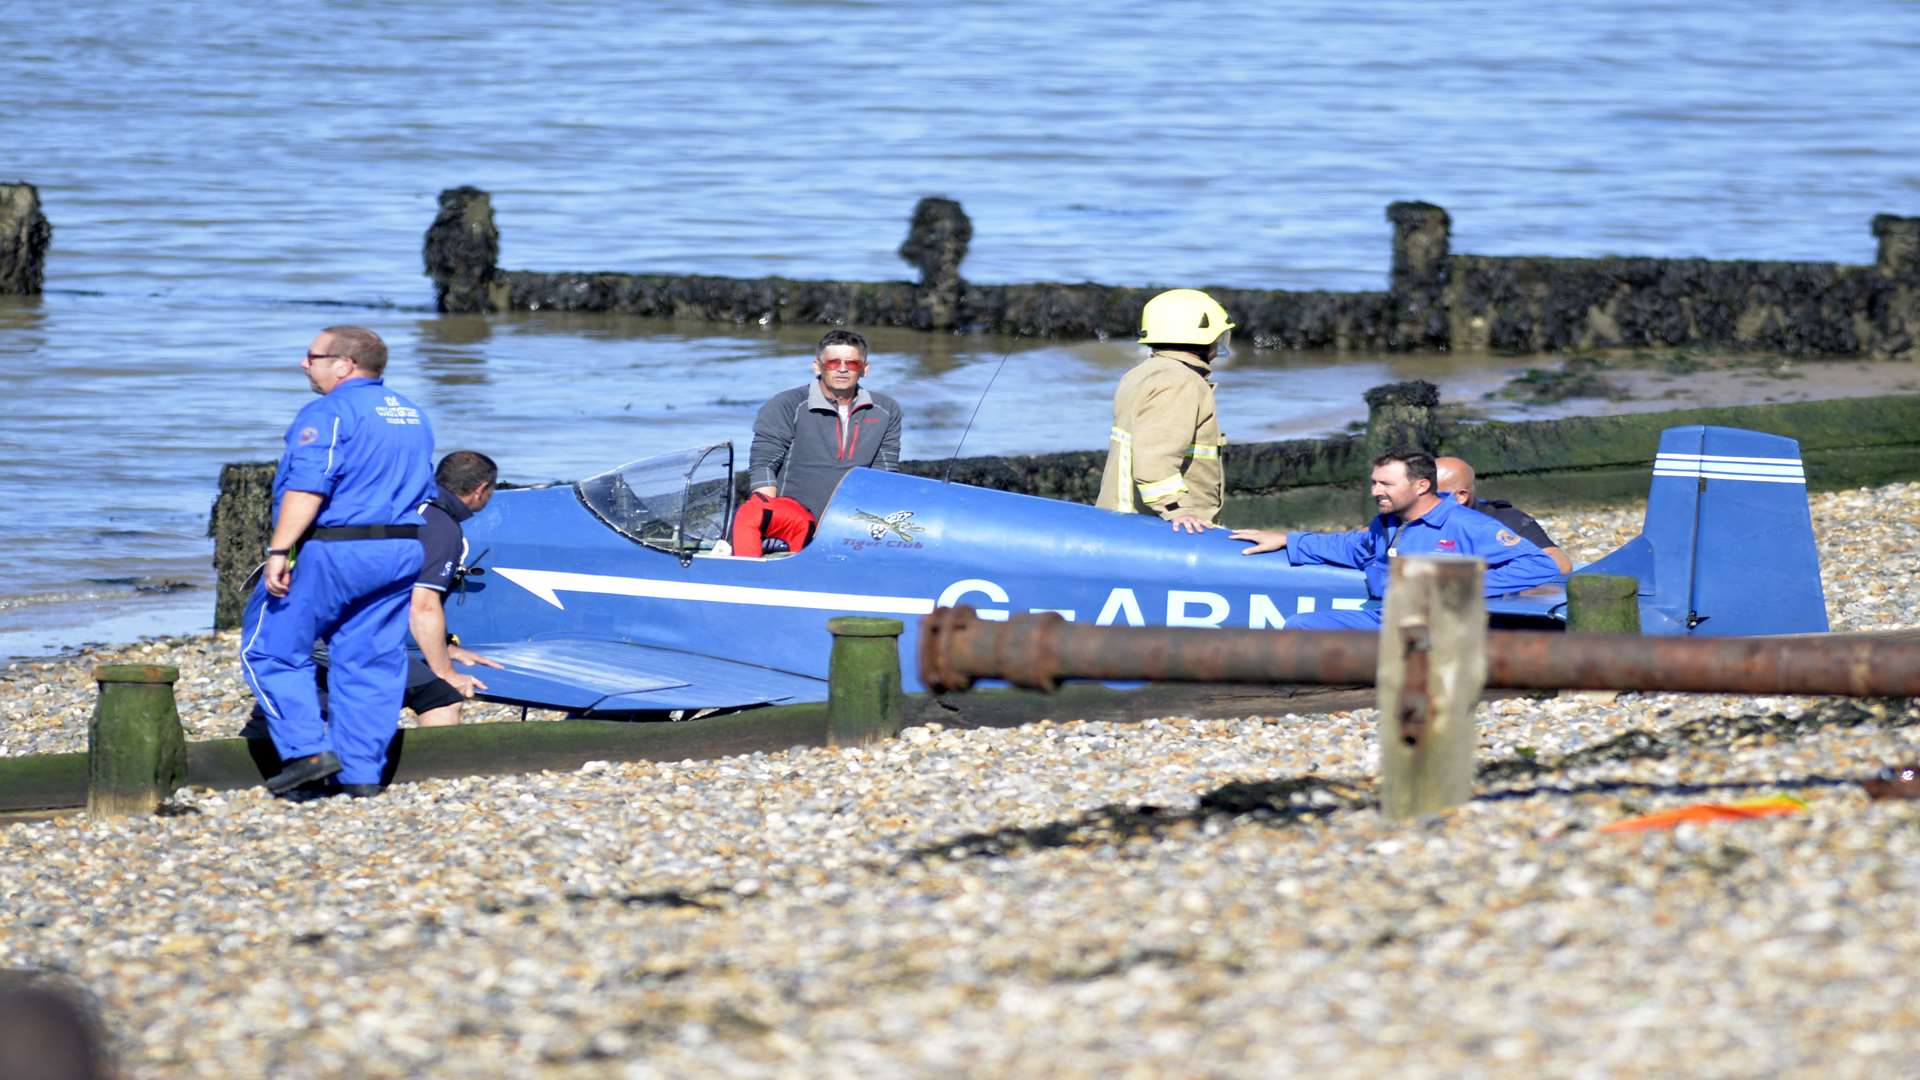 The plane is recovered from the sea